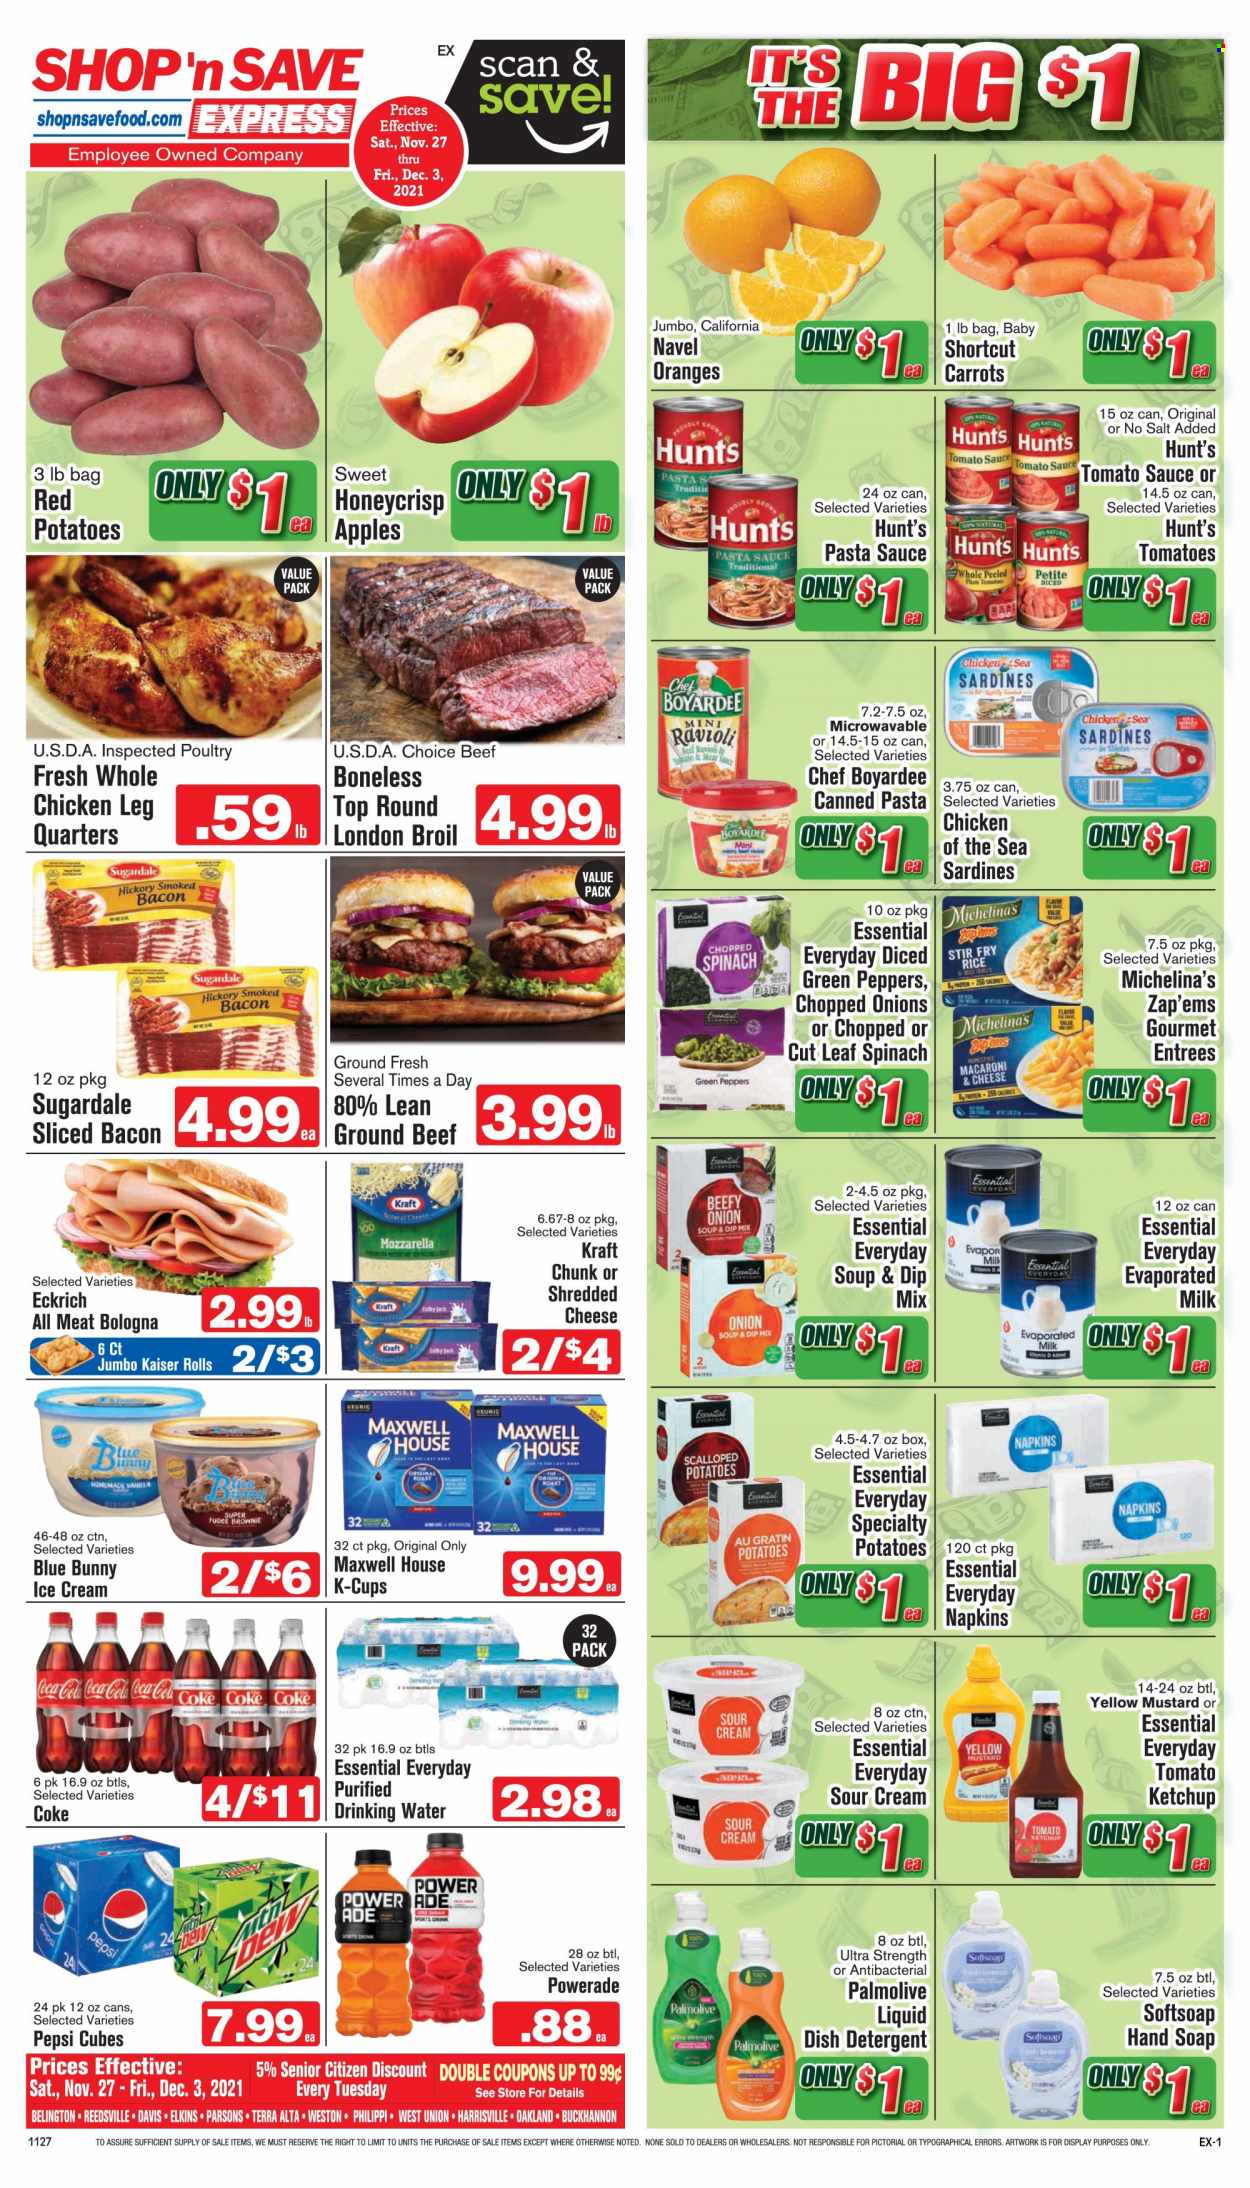 thumbnail - Shop ‘n Save Express Flyer - 11/27/2021 - 12/03/2021 - Sales products - brownies, carrots, spinach, tomatoes, potatoes, red potatoes, apples, oranges, chicken legs, beef meat, ground beef, sardines, macaroni & cheese, ravioli, pasta sauce, soup, Kraft®, Sugardale, bacon, mozzarella, shredded cheese, evaporated milk, sour cream, dip, ice cream, Blue Bunny, tomato sauce, Chicken of the Sea, Chef Boyardee, rice, mustard, ketchup, Coca-Cola, Powerade, Pepsi, Maxwell House, coffee capsules, K-Cups, napkins, detergent, Softsoap, hand soap, Palmolive, soap. Page 1.